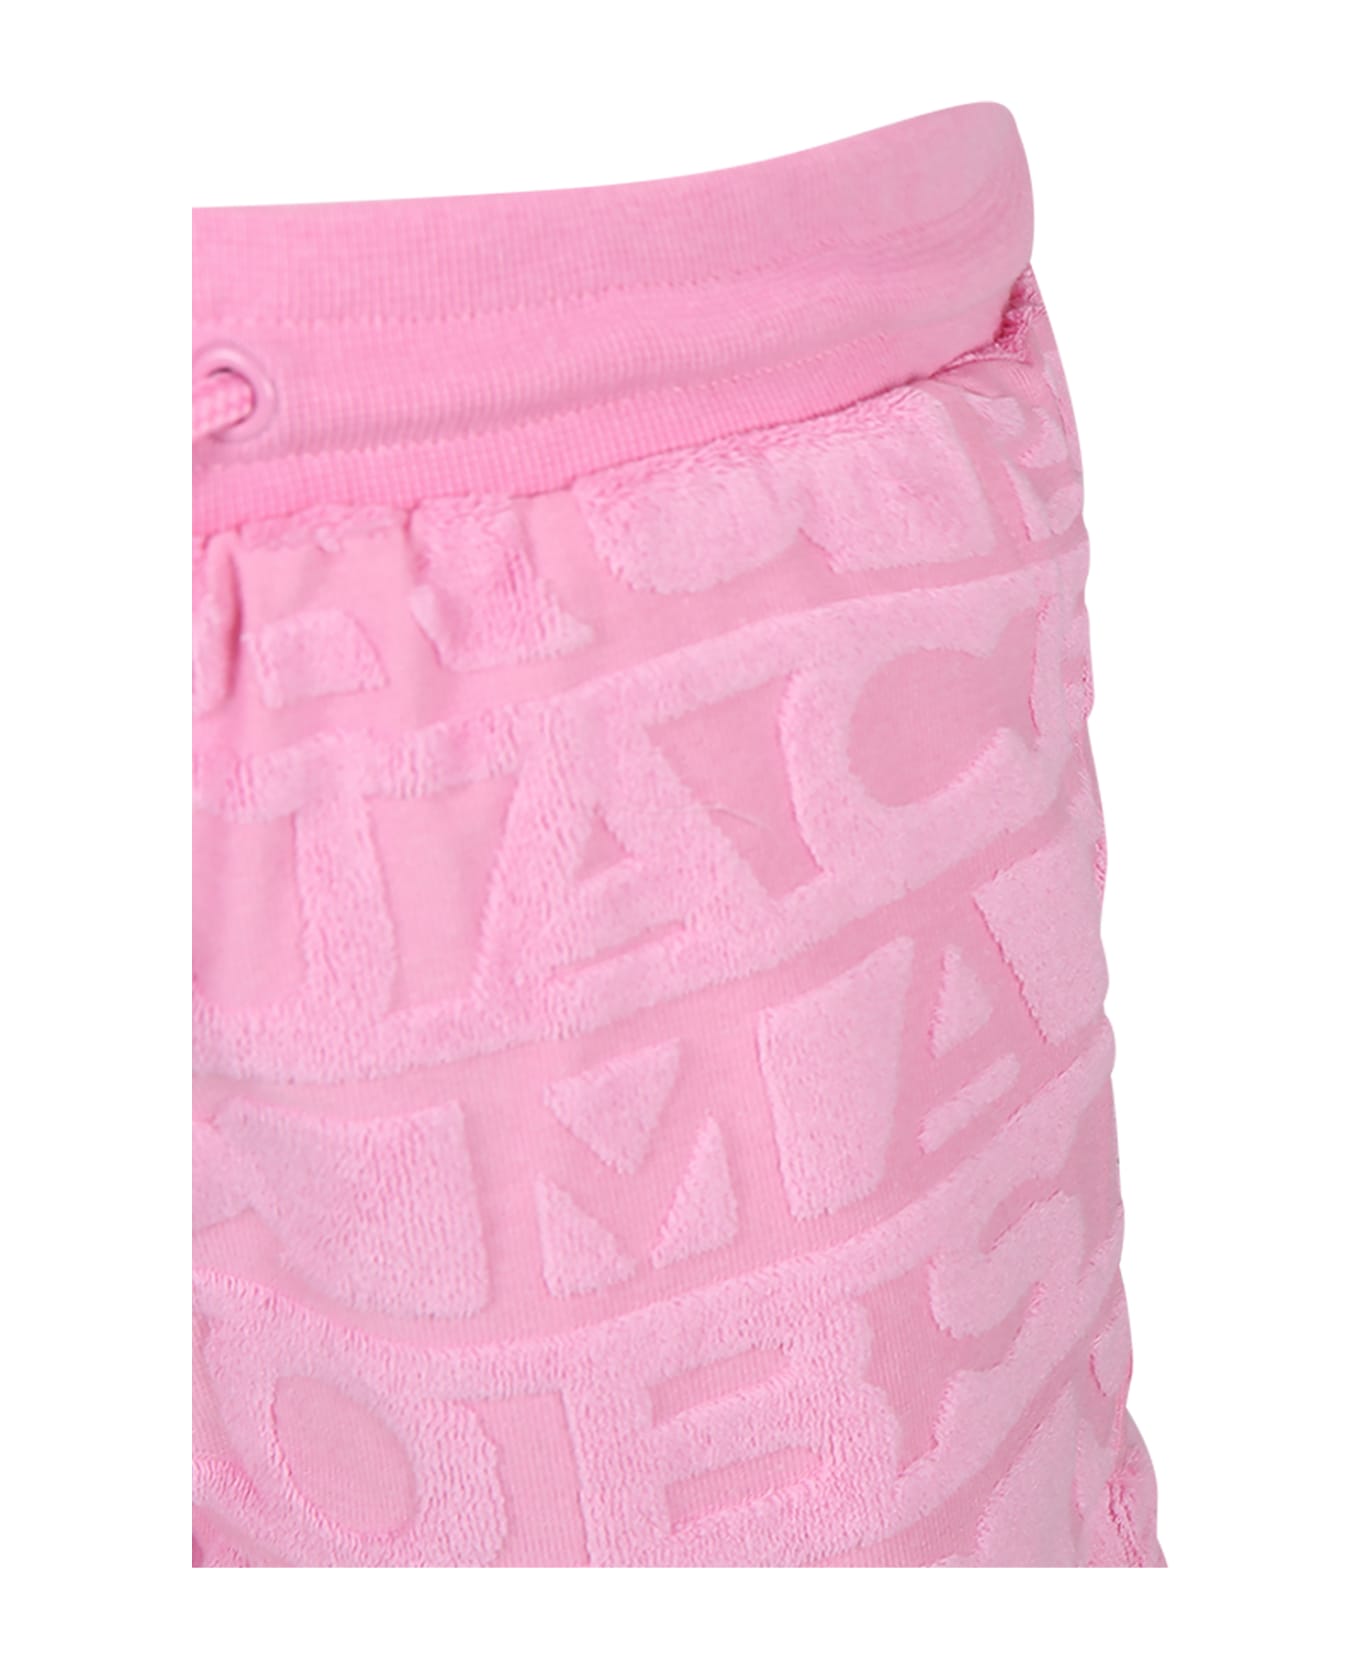 Marc Jacobs Pink Shorts For Girl With Logo - Pink ボトムス